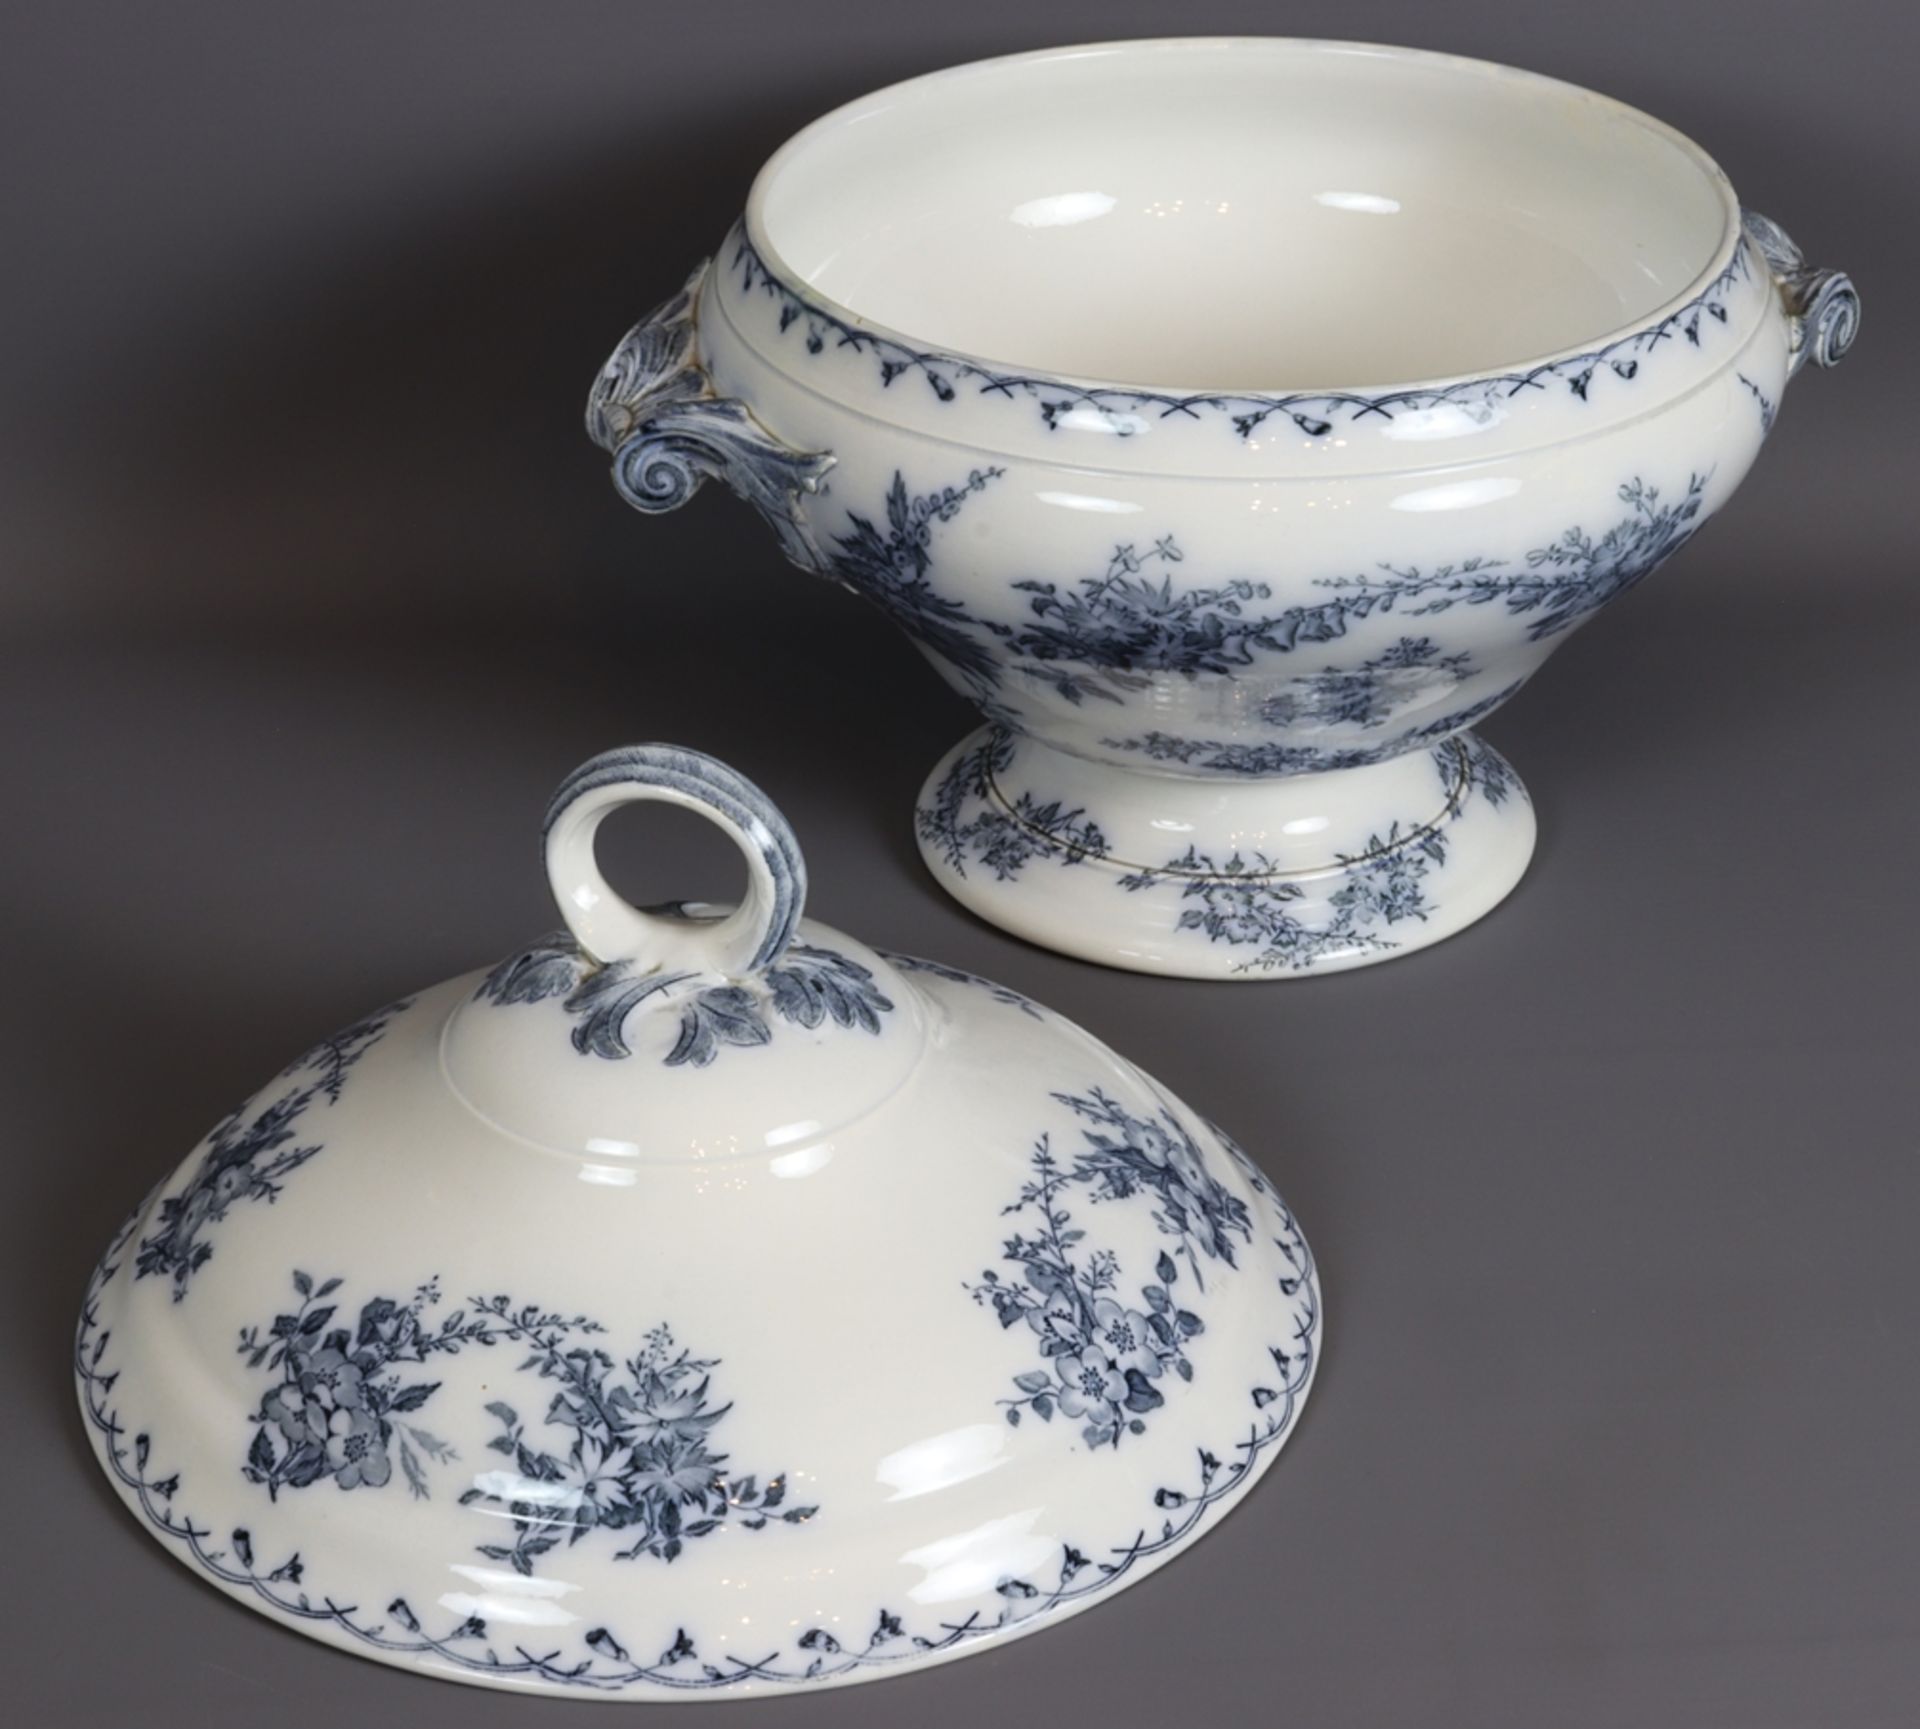 Lidded tureen plus additional parts, Historism before 1900, France - Image 2 of 6